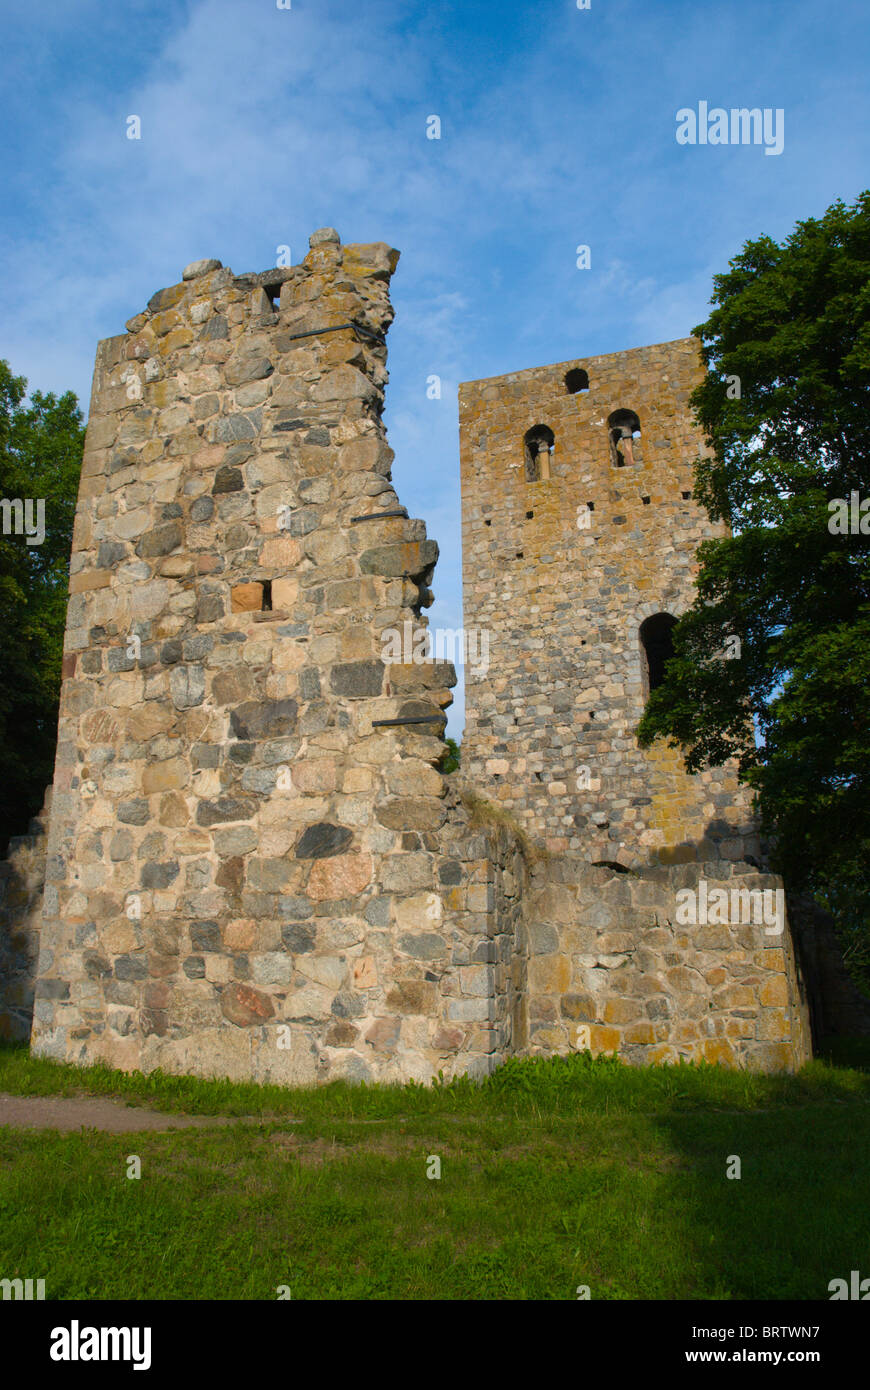 Sankt Pers church ruins in Sigtuna the oldest town in Sweden in Greater Stockholm area Stock Photo